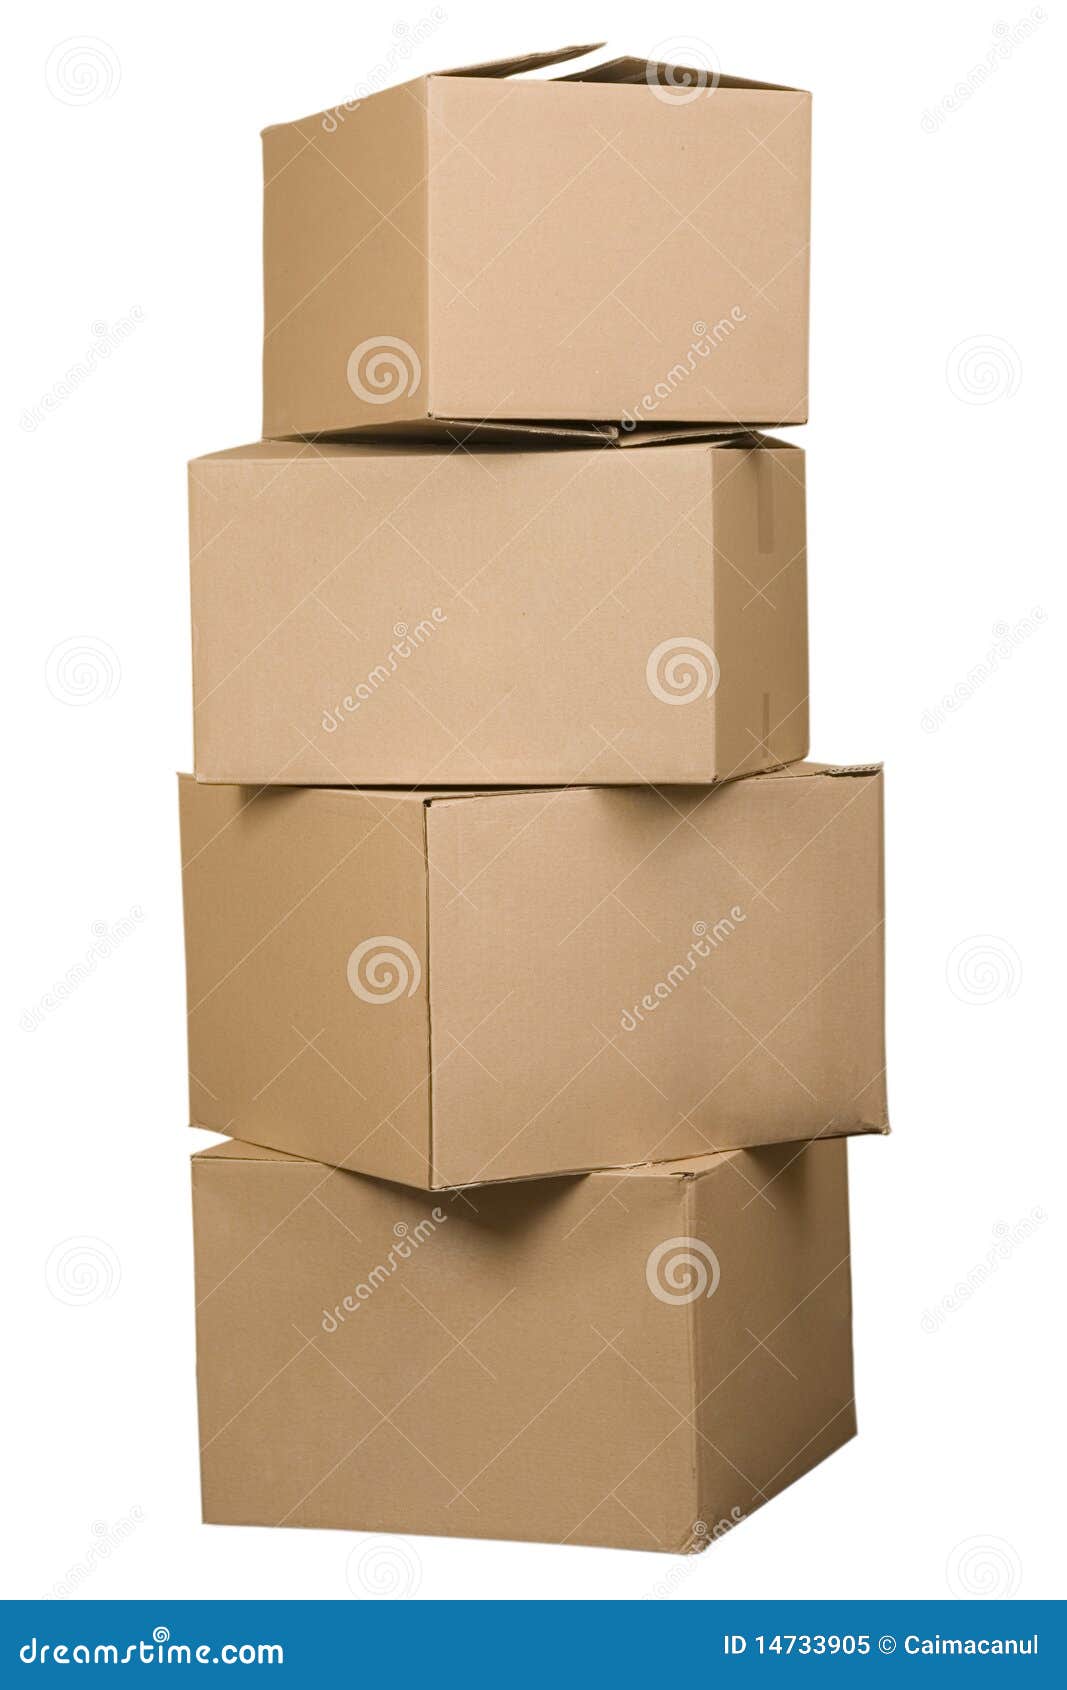 brown cardboard boxes arranged in stack